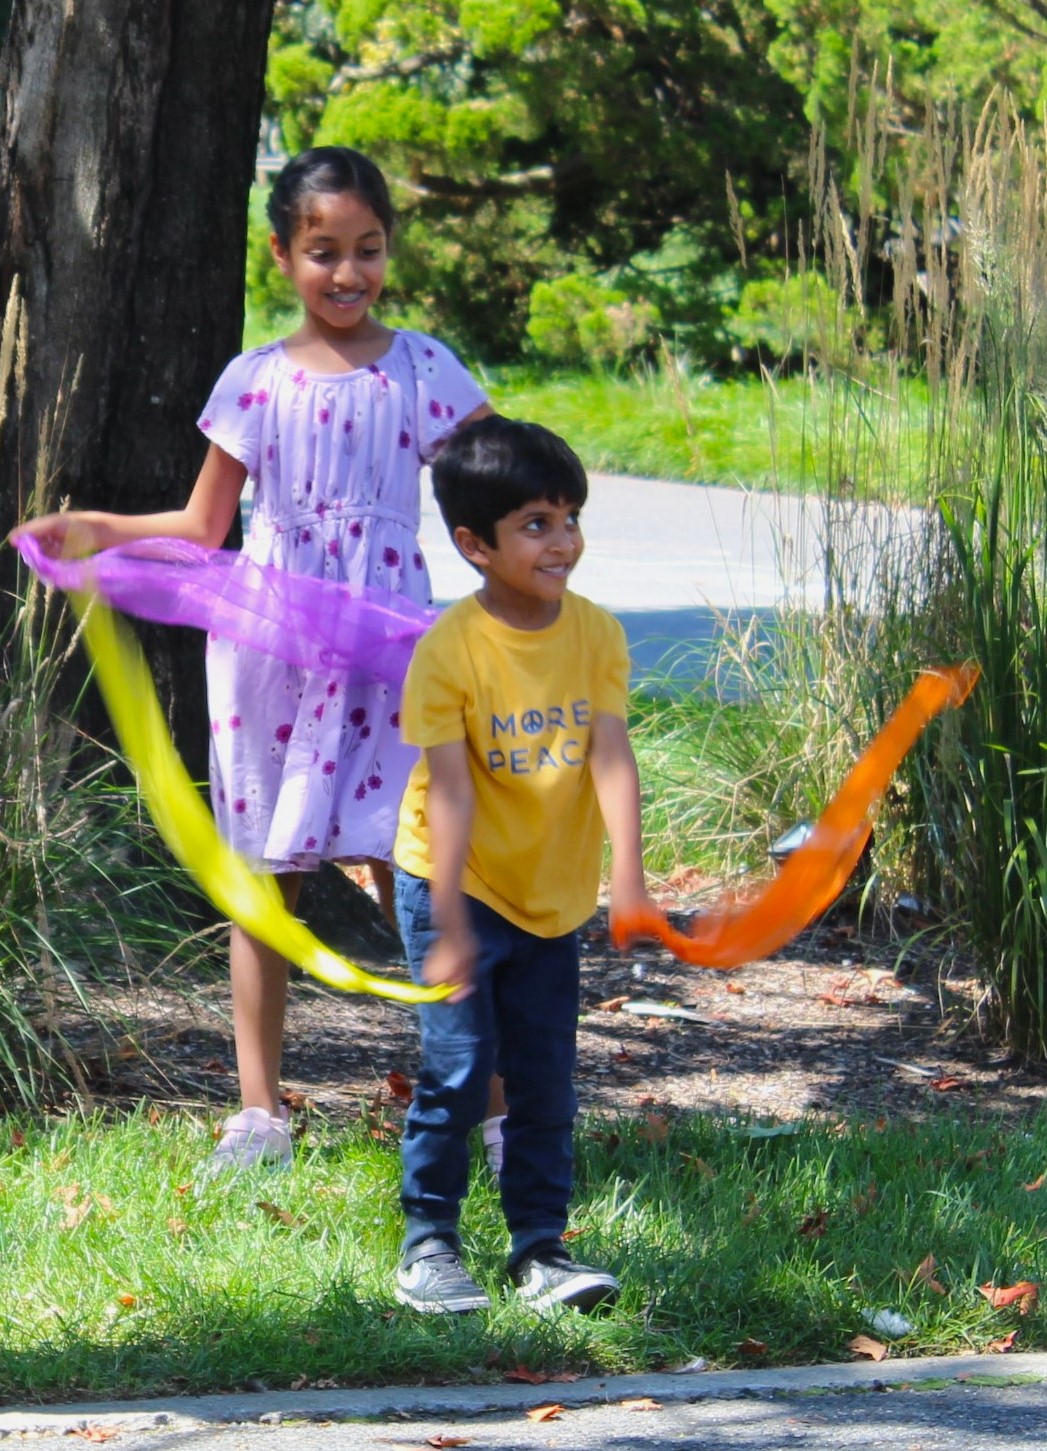 Two smiling children standing in the grass and holding purple, yellow, and orange scarves.